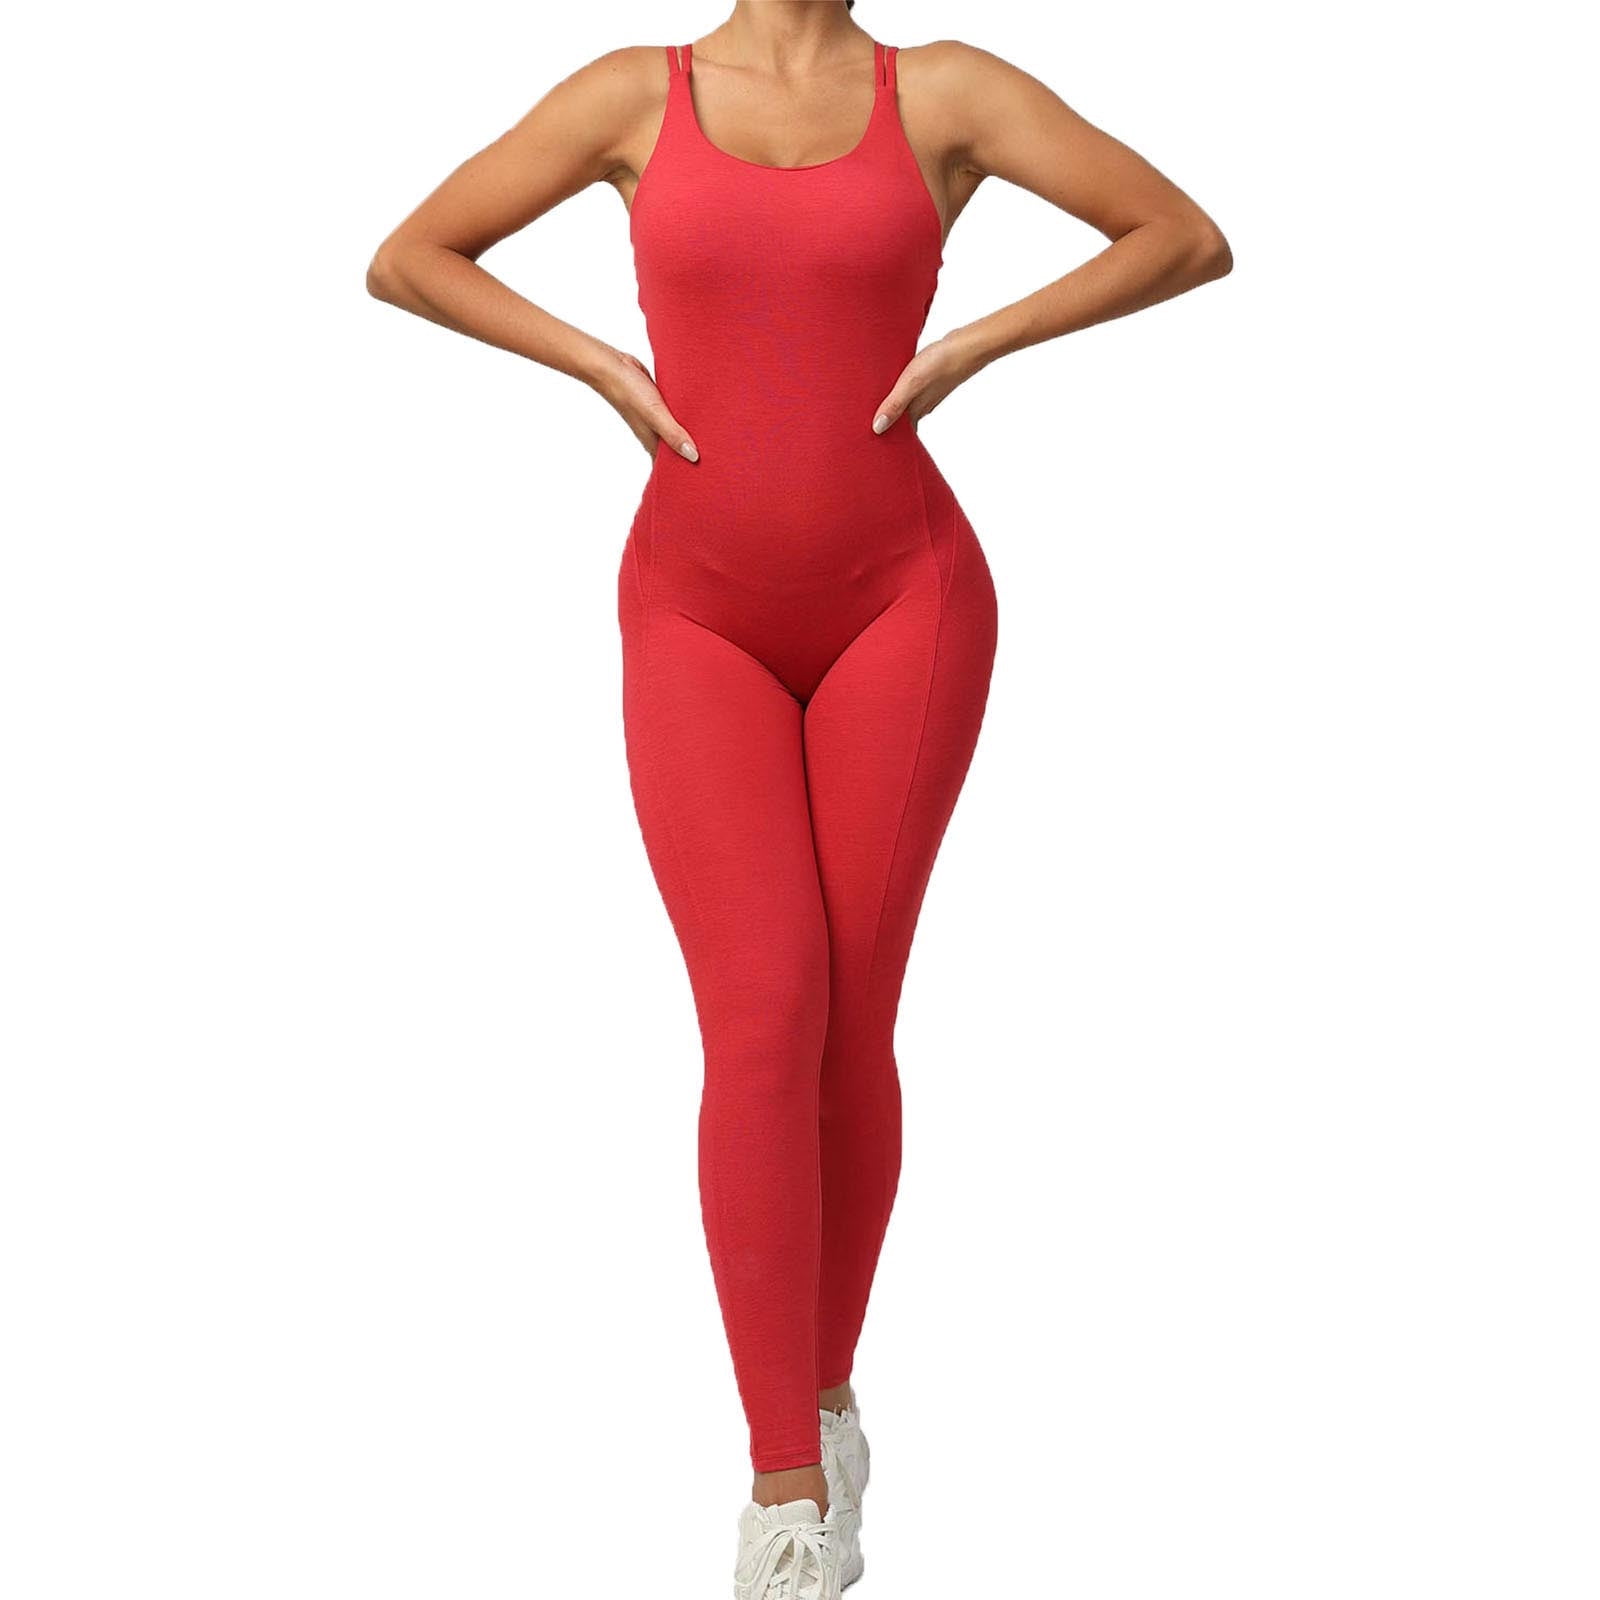 Sweat Pants Women Workout Leggings for Women Butt Lift Womans Workout Pants  Joggers for Women Lightning Deals of Today Deal of The Day Prime Today Only  Clearance One Dollar Items Only Pink